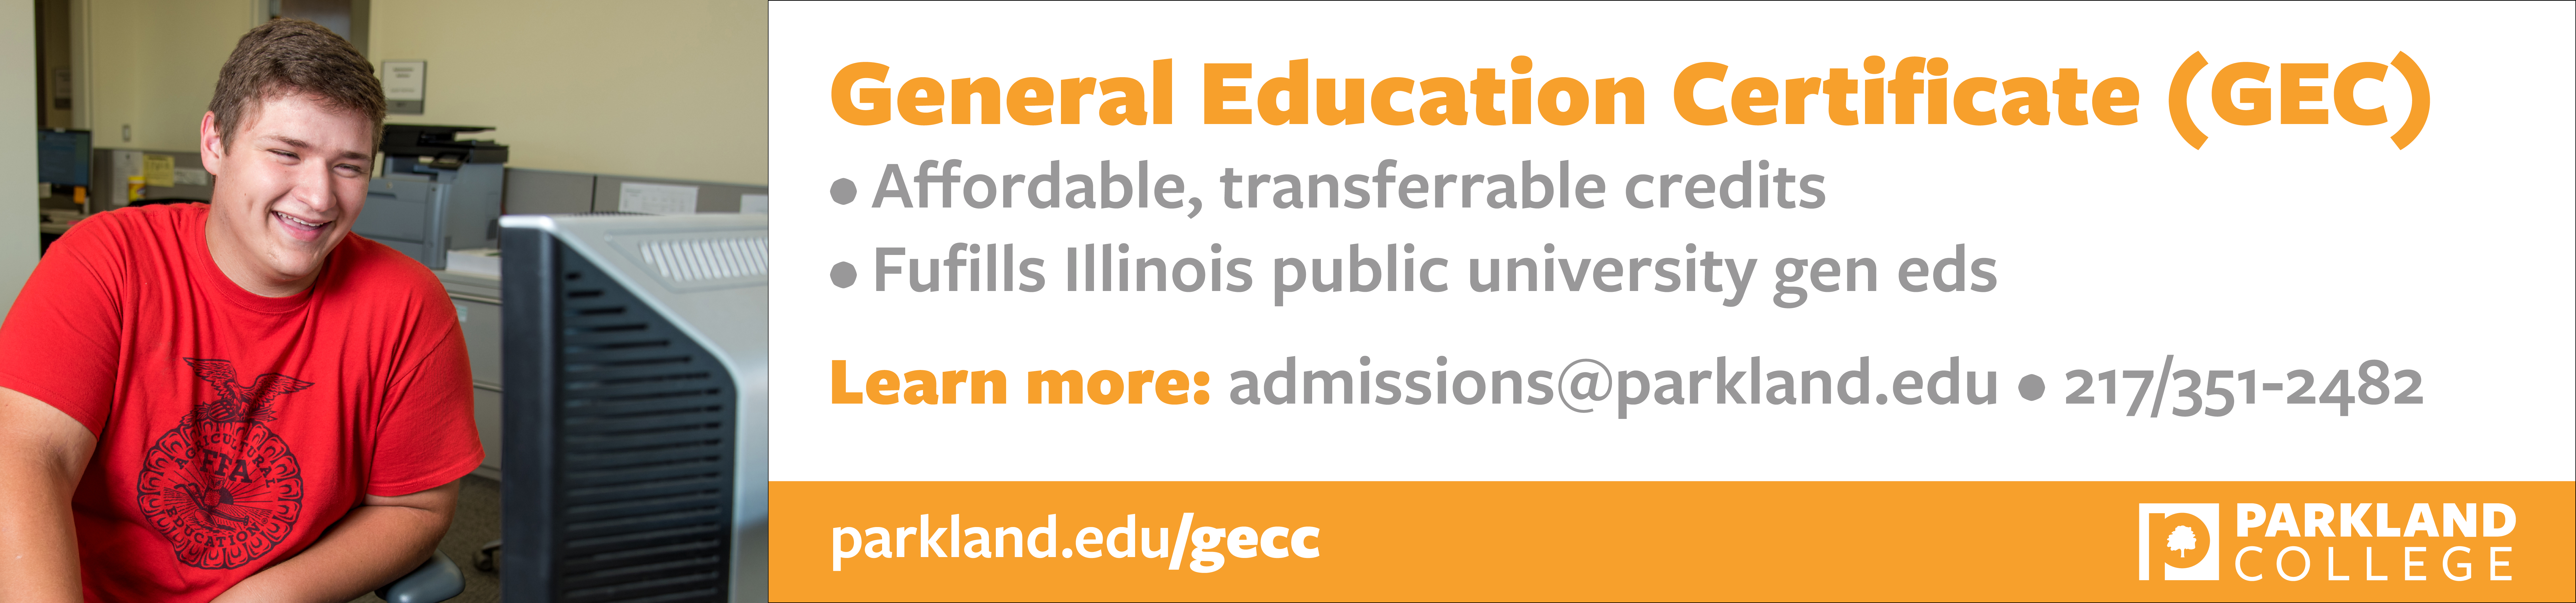 General Education Certificate gives you affordable, transferrable credits that fulfill Illinois public university gen eds